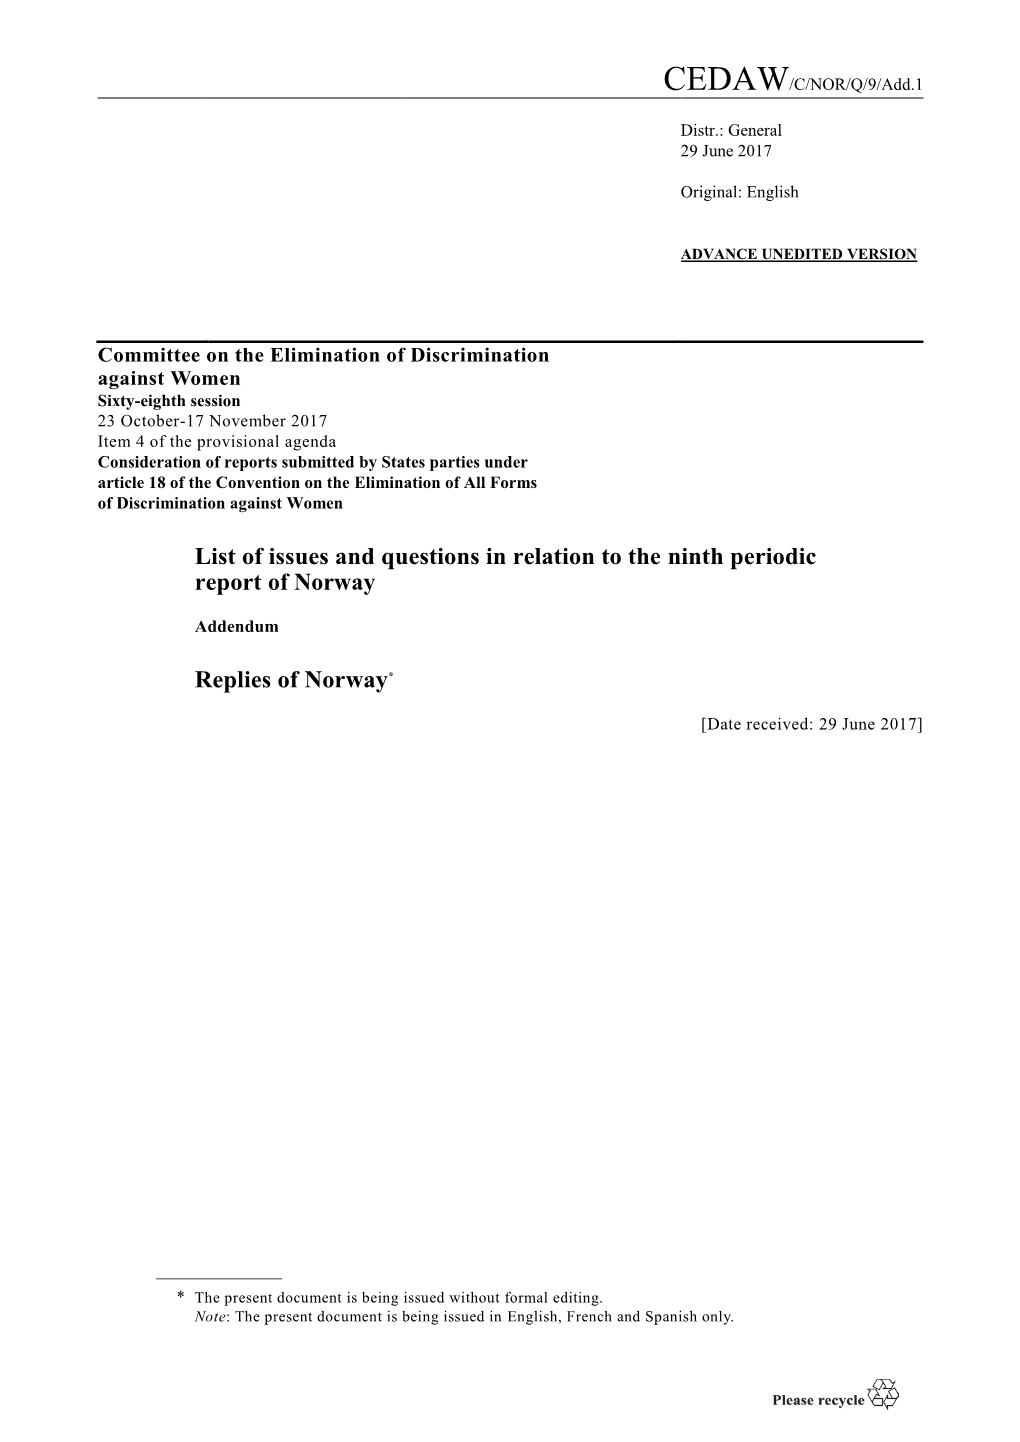 List of Issues and Questions in Relation to the Ninth Periodic Report of Norway